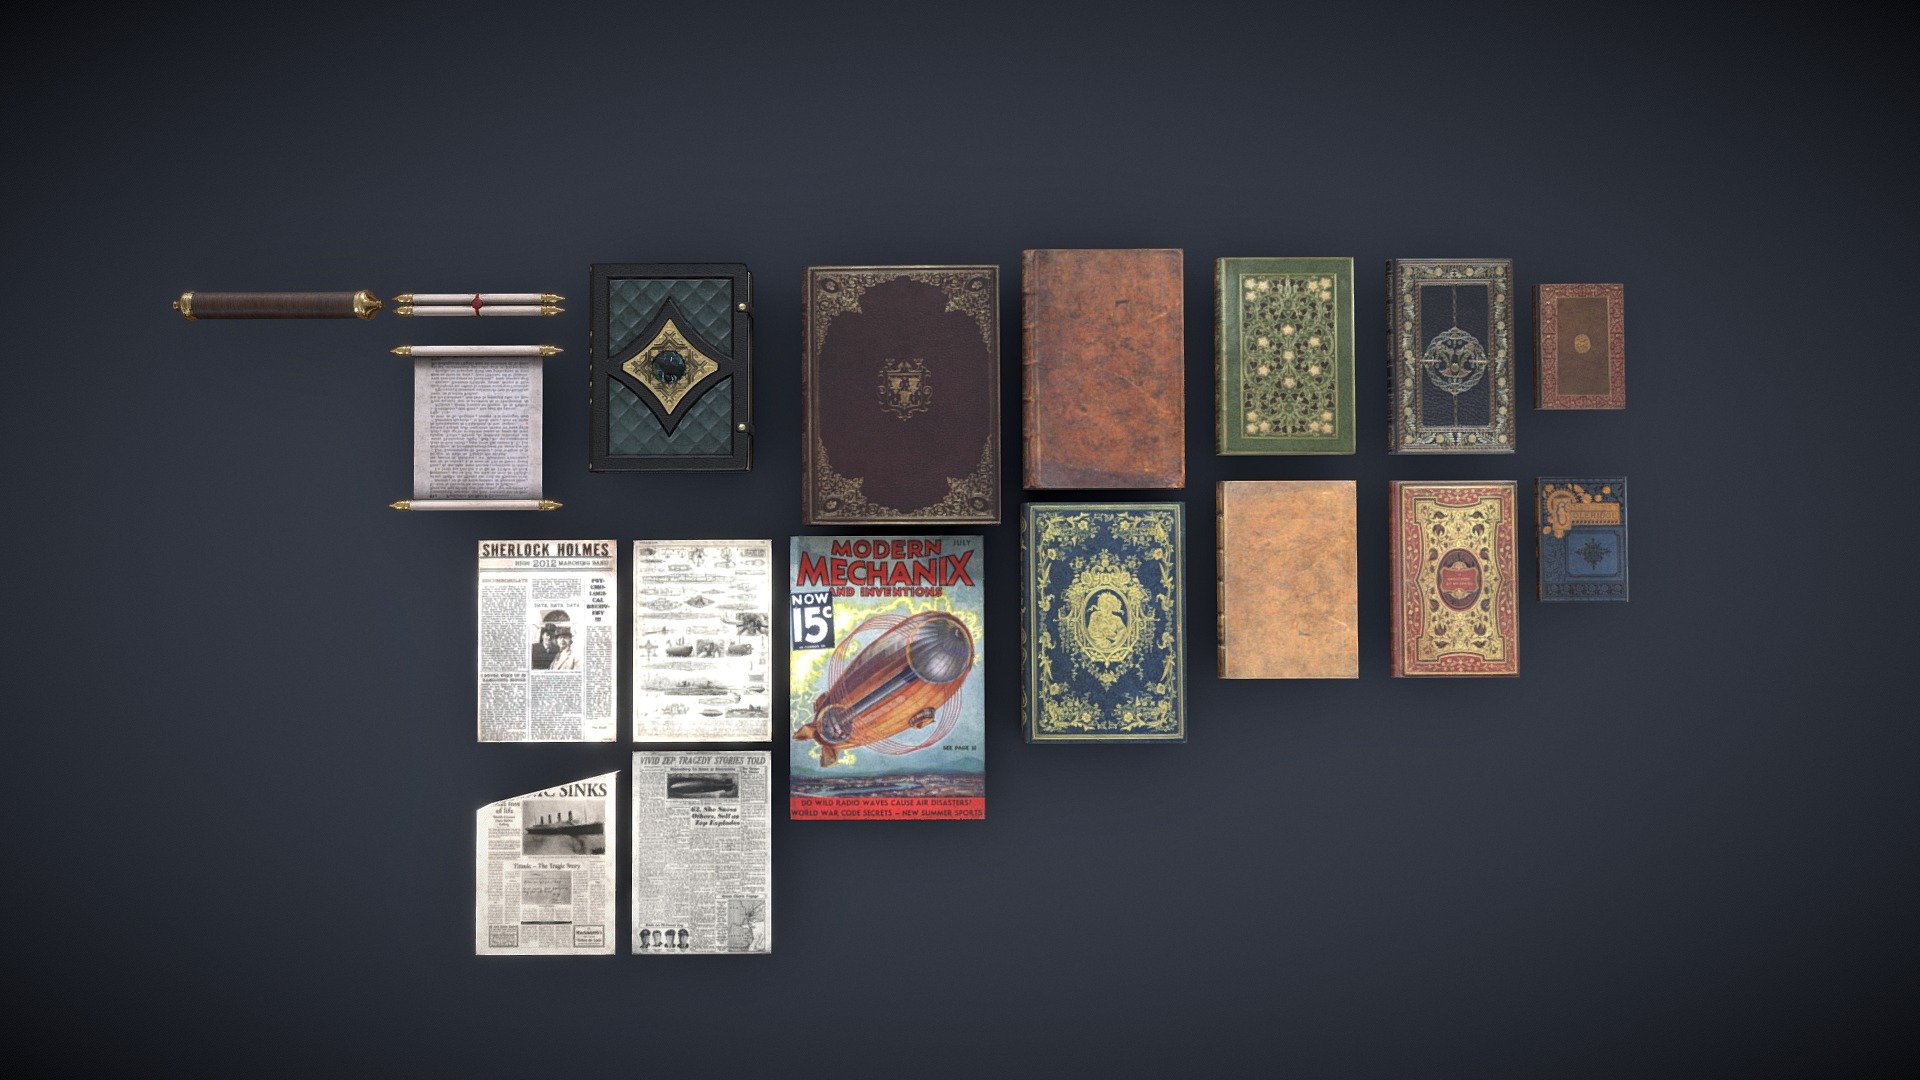 Hi all, just a small collection of low polys books and parchment to fill the shelf of a victorian project.

Made with Maya, PS and Substance.

You will find in the package Scene file, FBX and 2k Textures.
If you have any customs need, please feel free to contact me 3d model